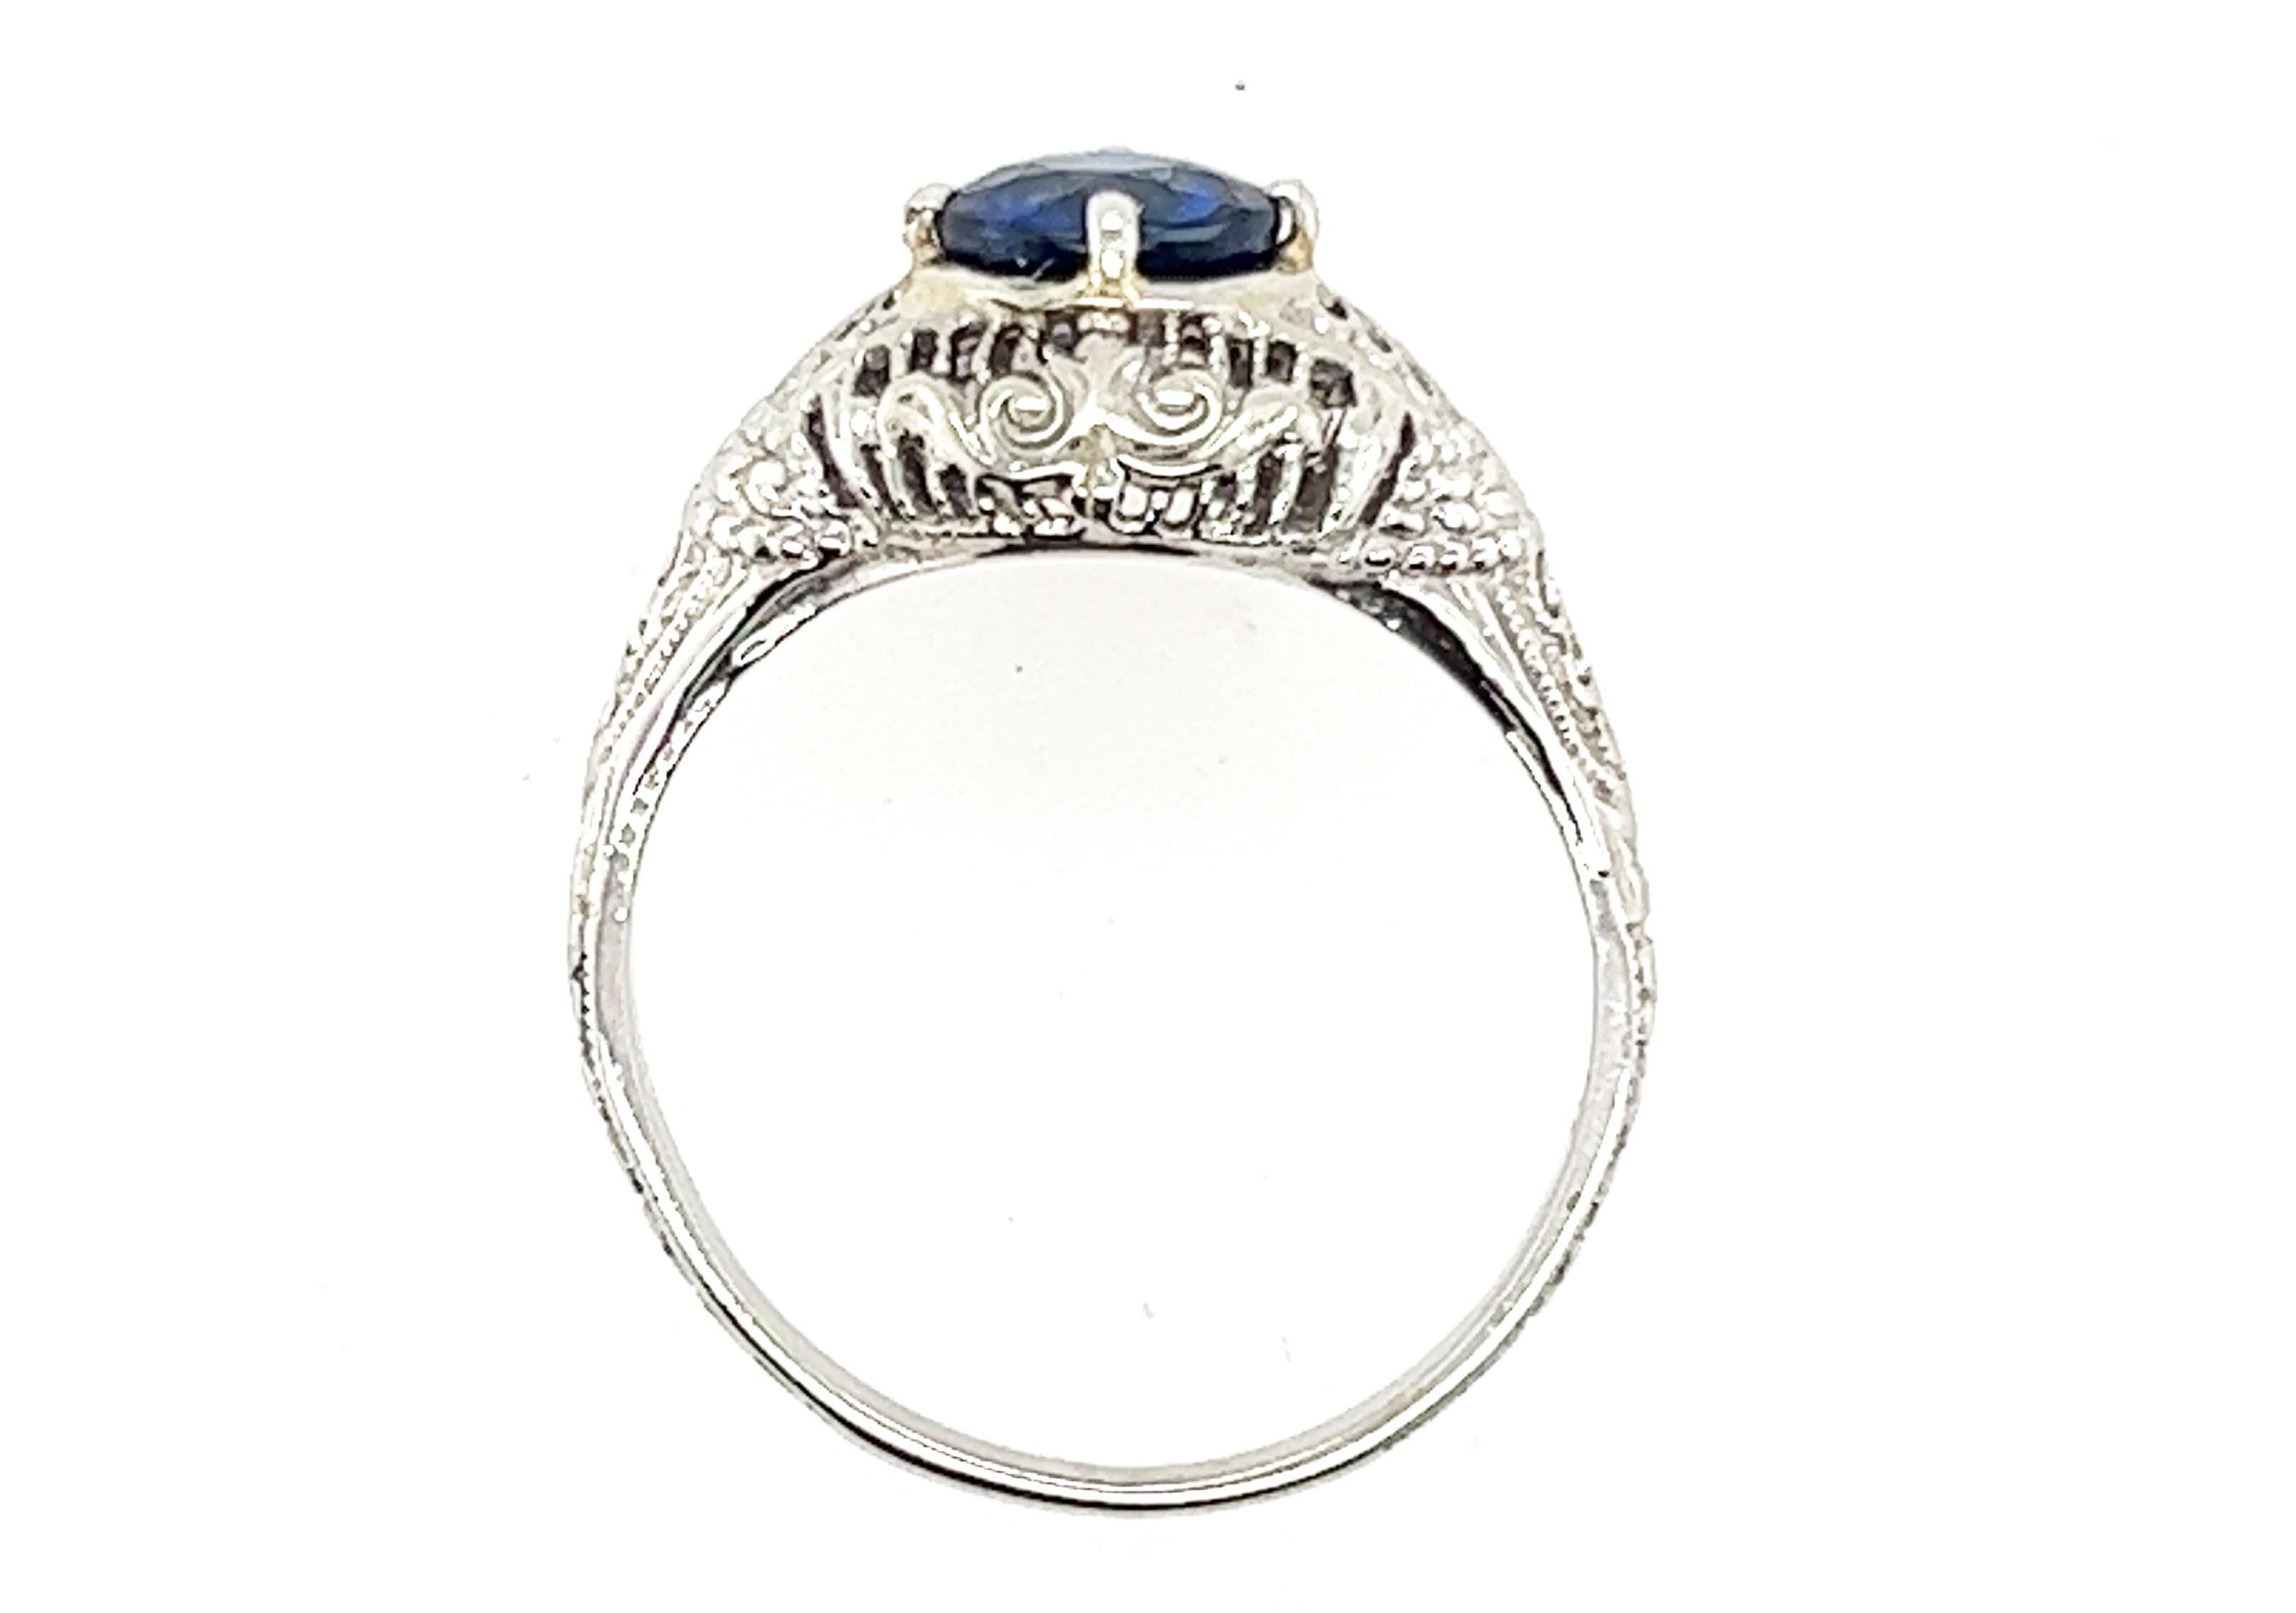 Genuine Original Art Deco Antique from 1930's Sapphire 18K White Gold Solitaire Ring  1.14ct


Featuring a Gorgeous Natural Blue Sapphire at 1.14ct Carat Weight

Crisp Filigree, Engraved Pattern on Shank 

Perfect Alternative Engagement Ring

100%